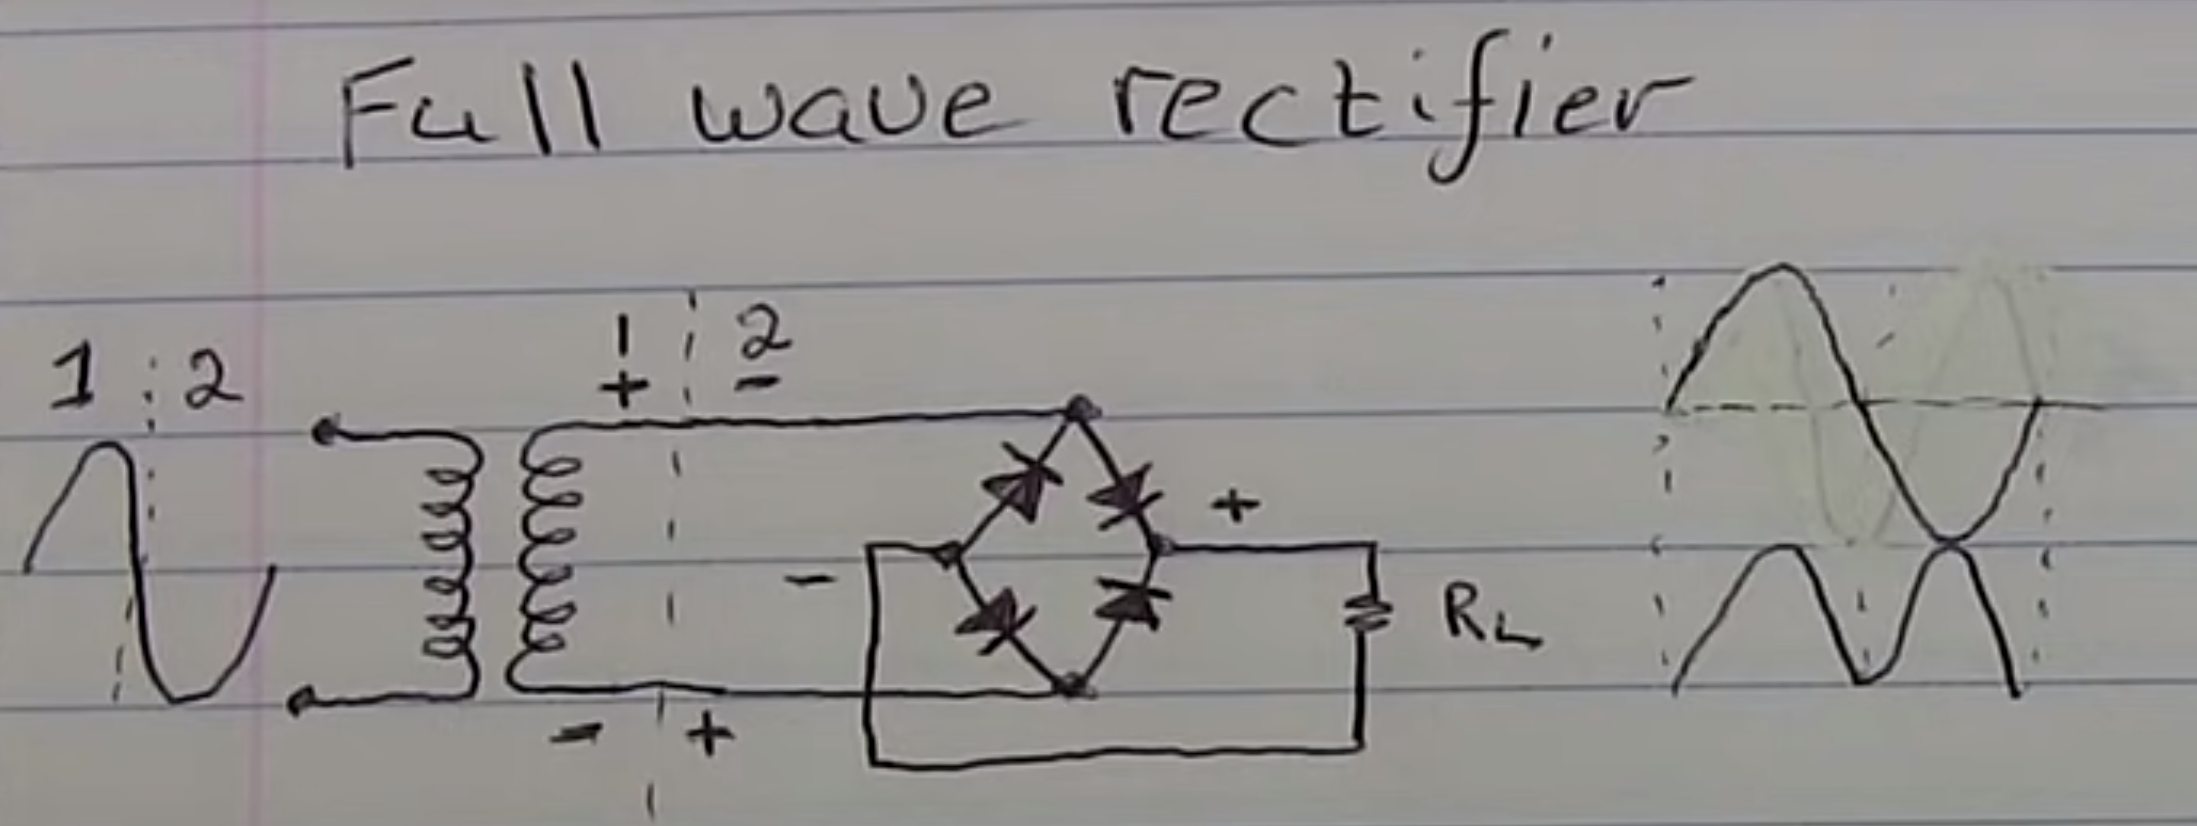 Full Wave Rectifier.png